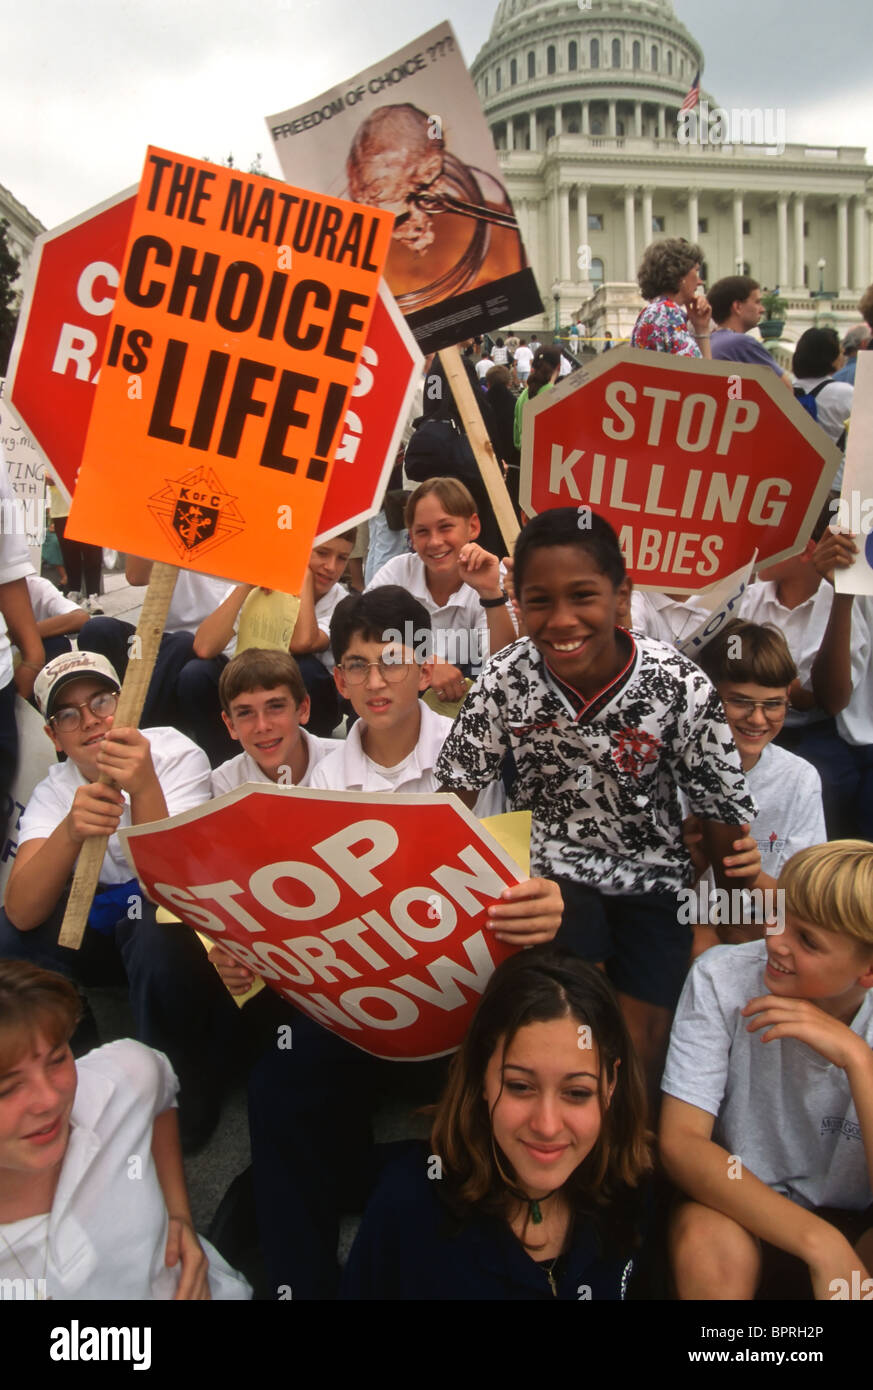 Anti-abortion protesters in front of the US Supreme Court building on the anniversary of Roe vs Wade Stock Photo